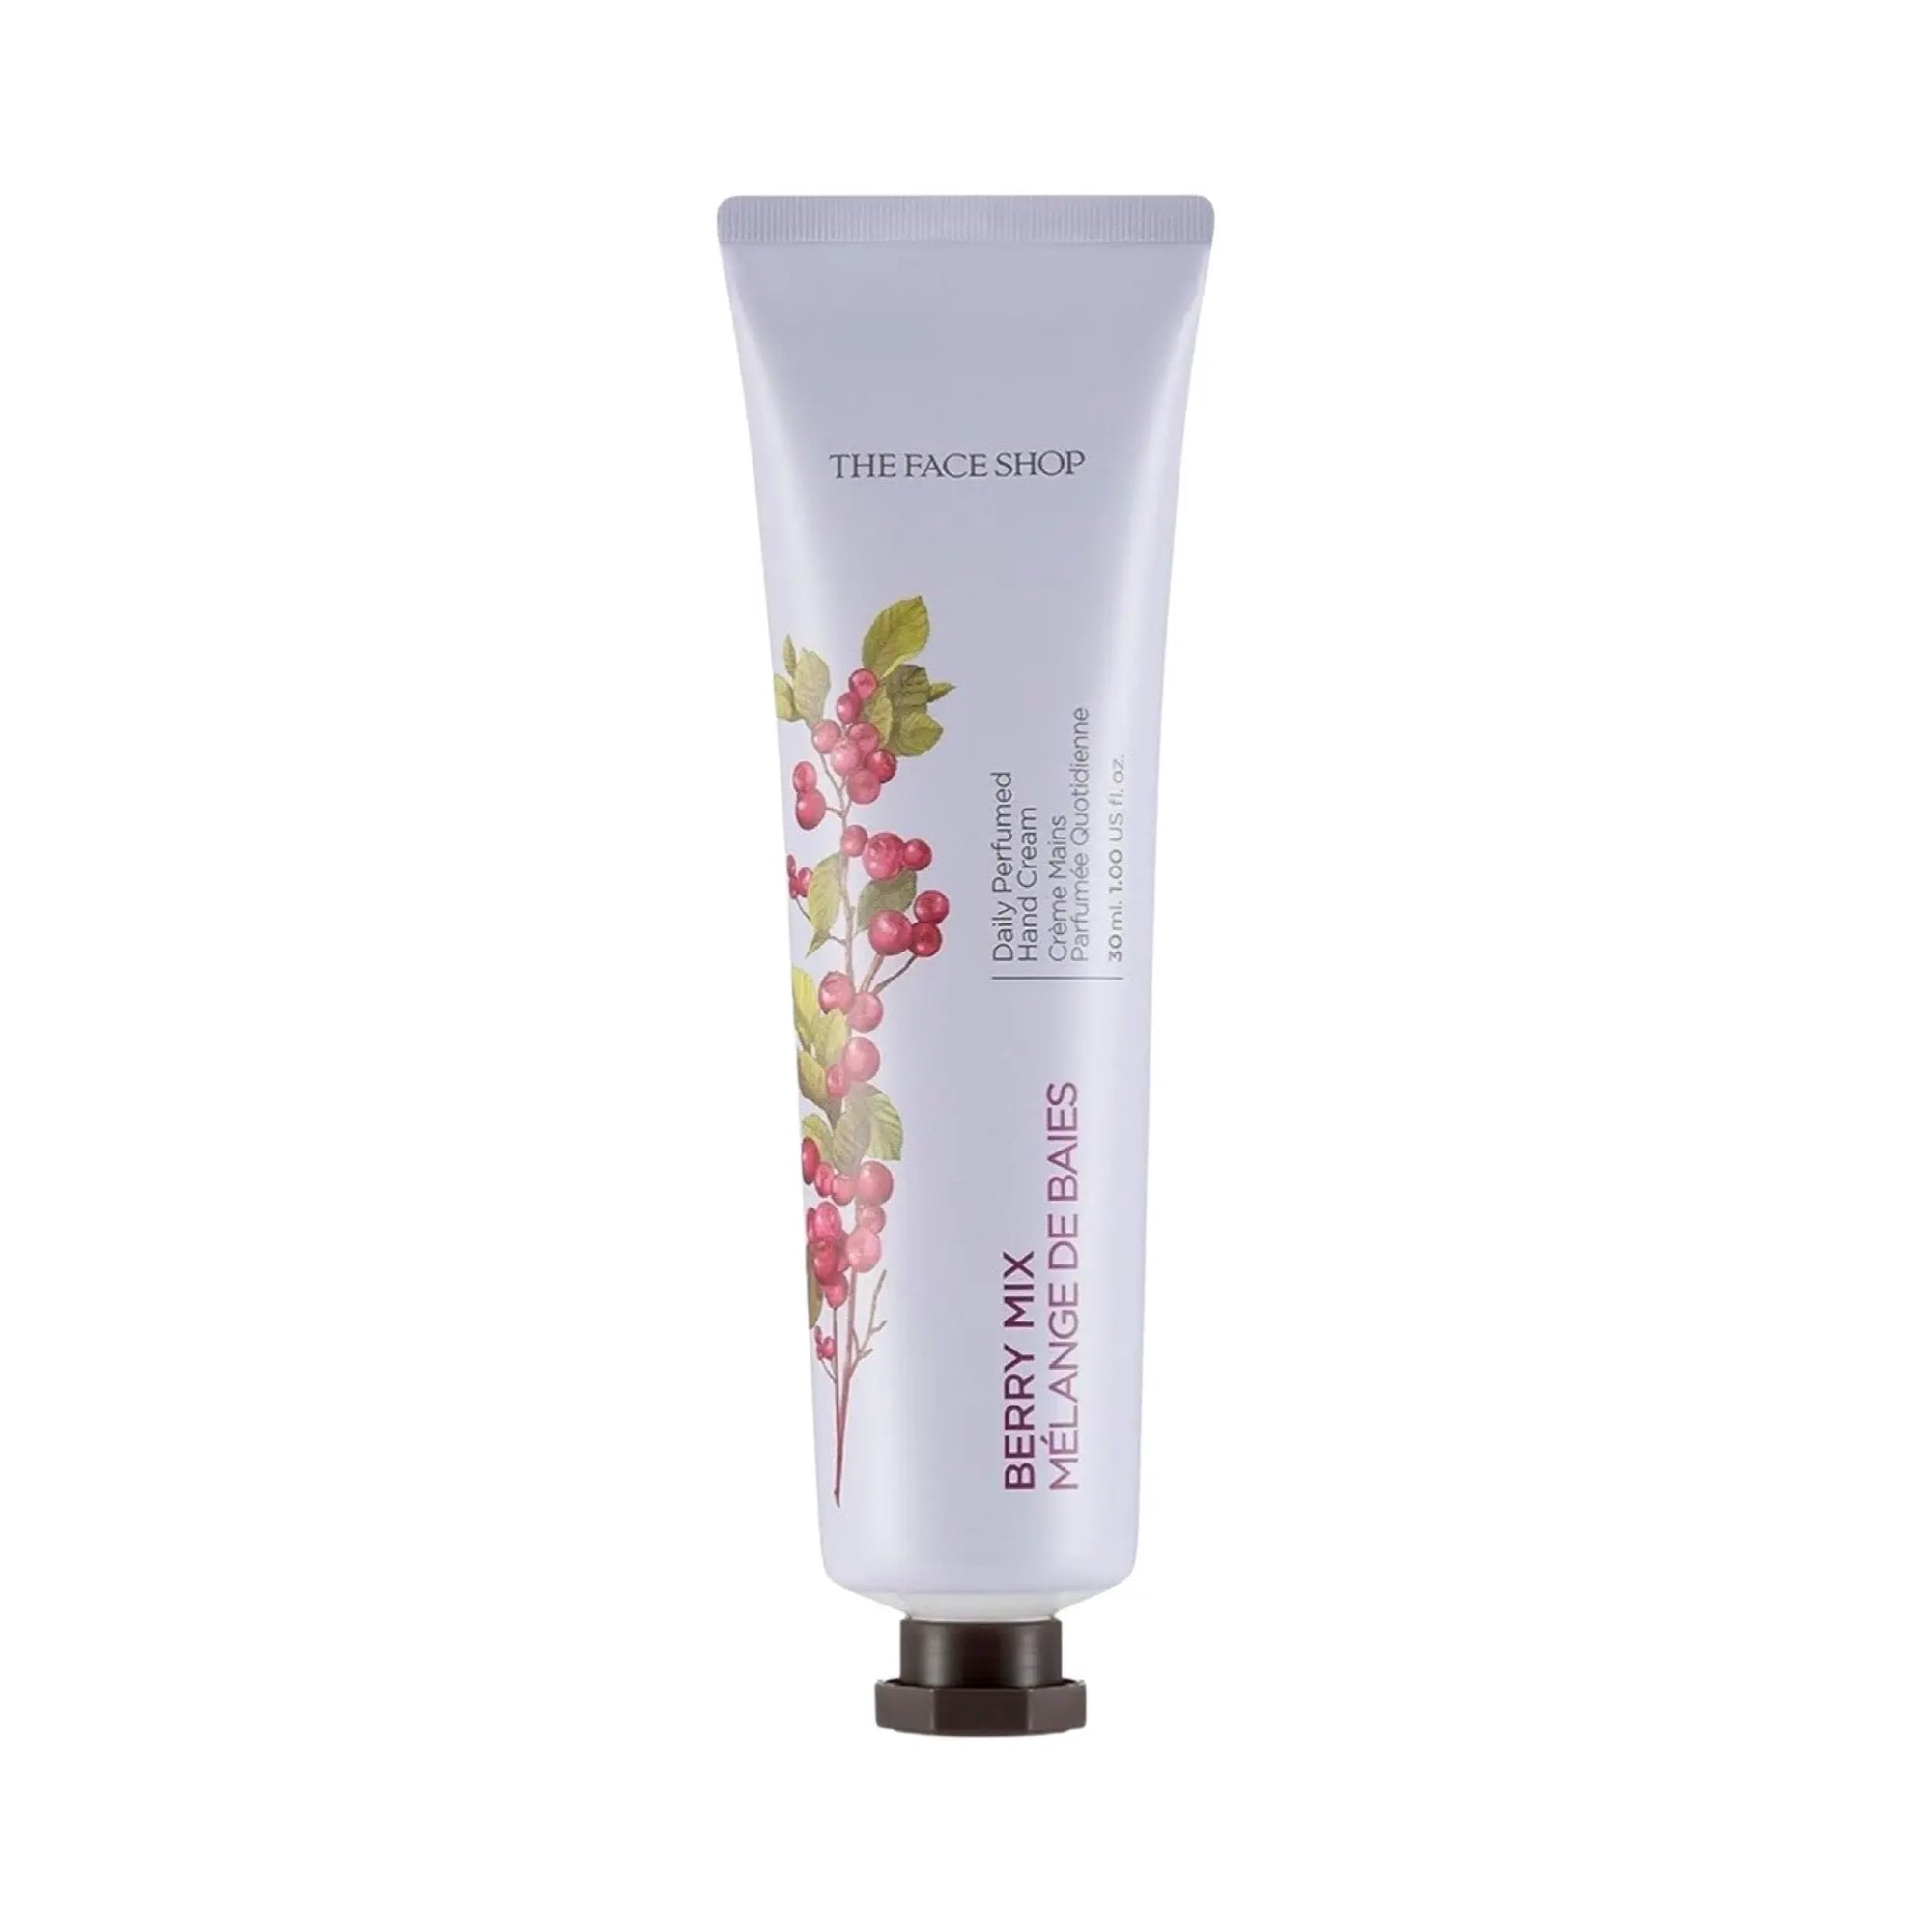 The Face Shop - Daily Perfumed Hand Cream 04 (Berry Mix) 30mL - WanderShop